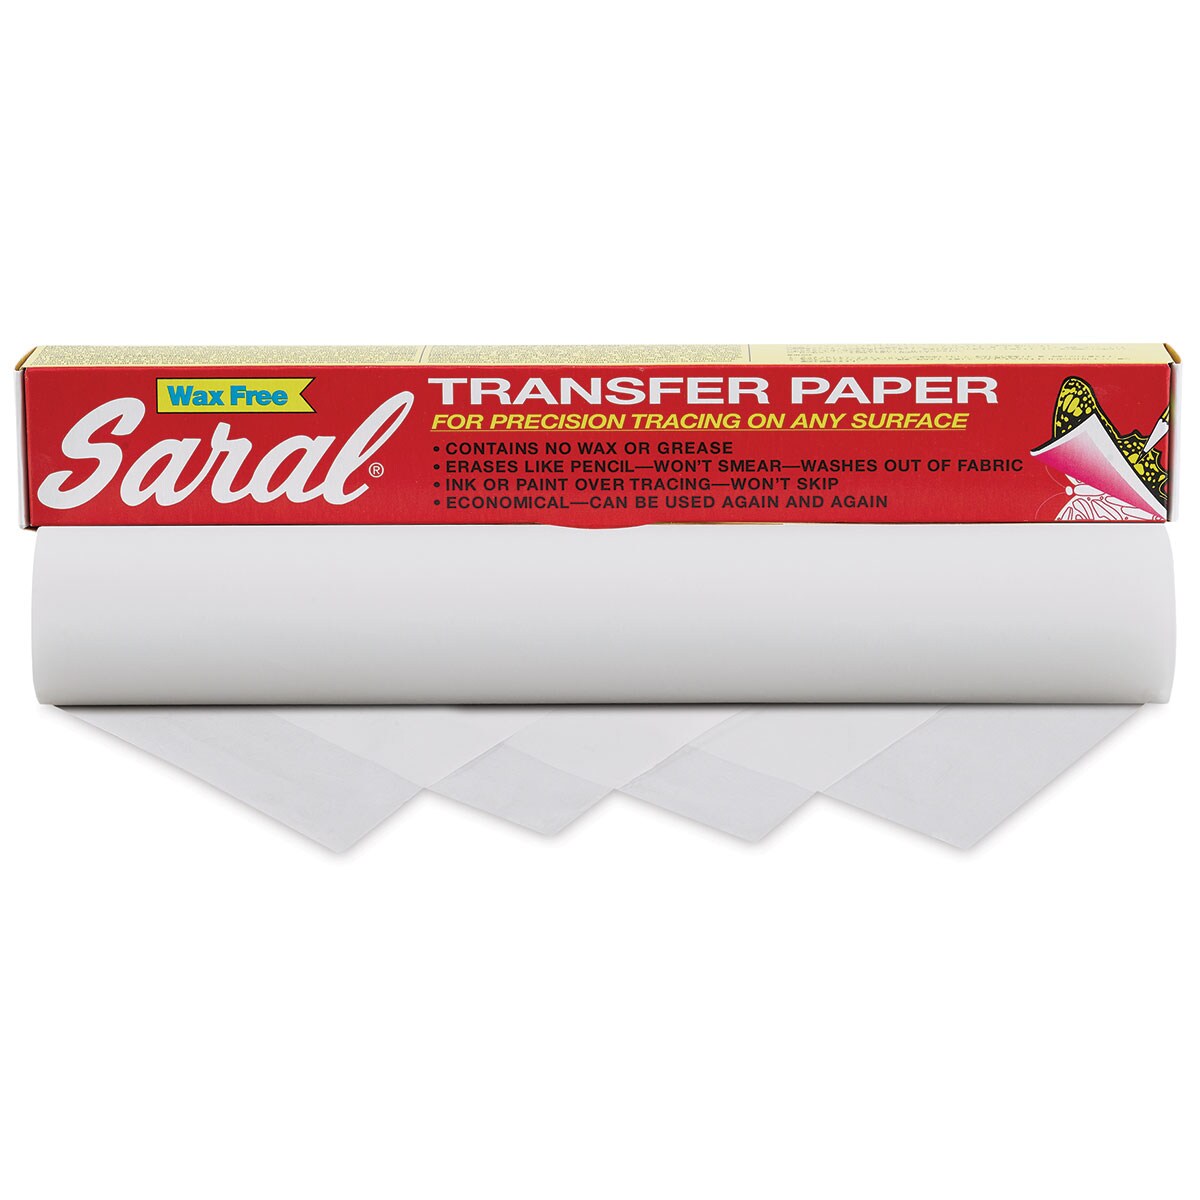 Saral Wax Free Transfer Paper - White